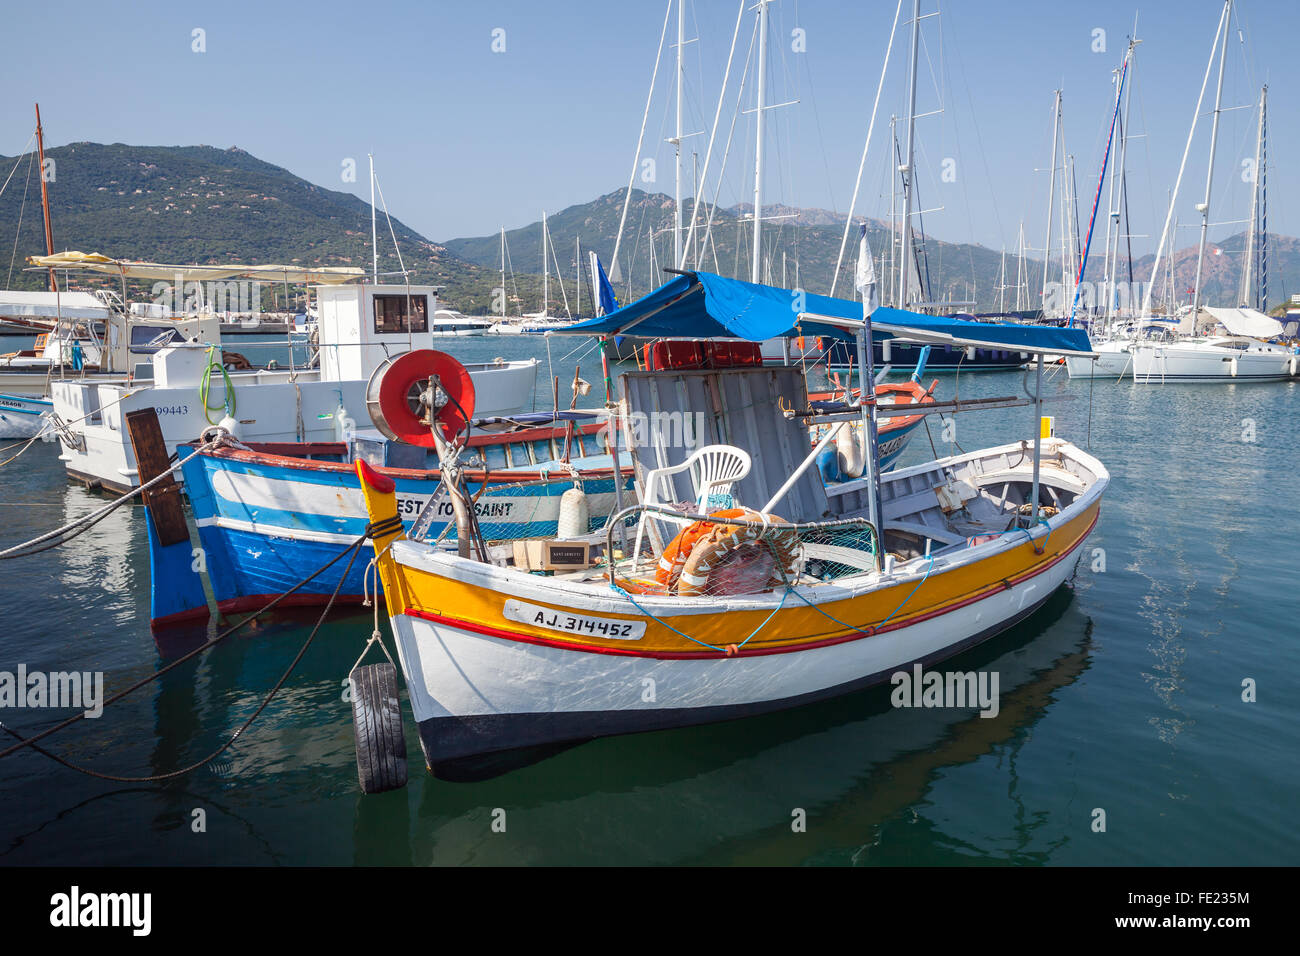 Propriano, France - July 3, 2015: Small colorful wooden fishing boats moored in Propriano resort town, Corsica, France Stock Photo